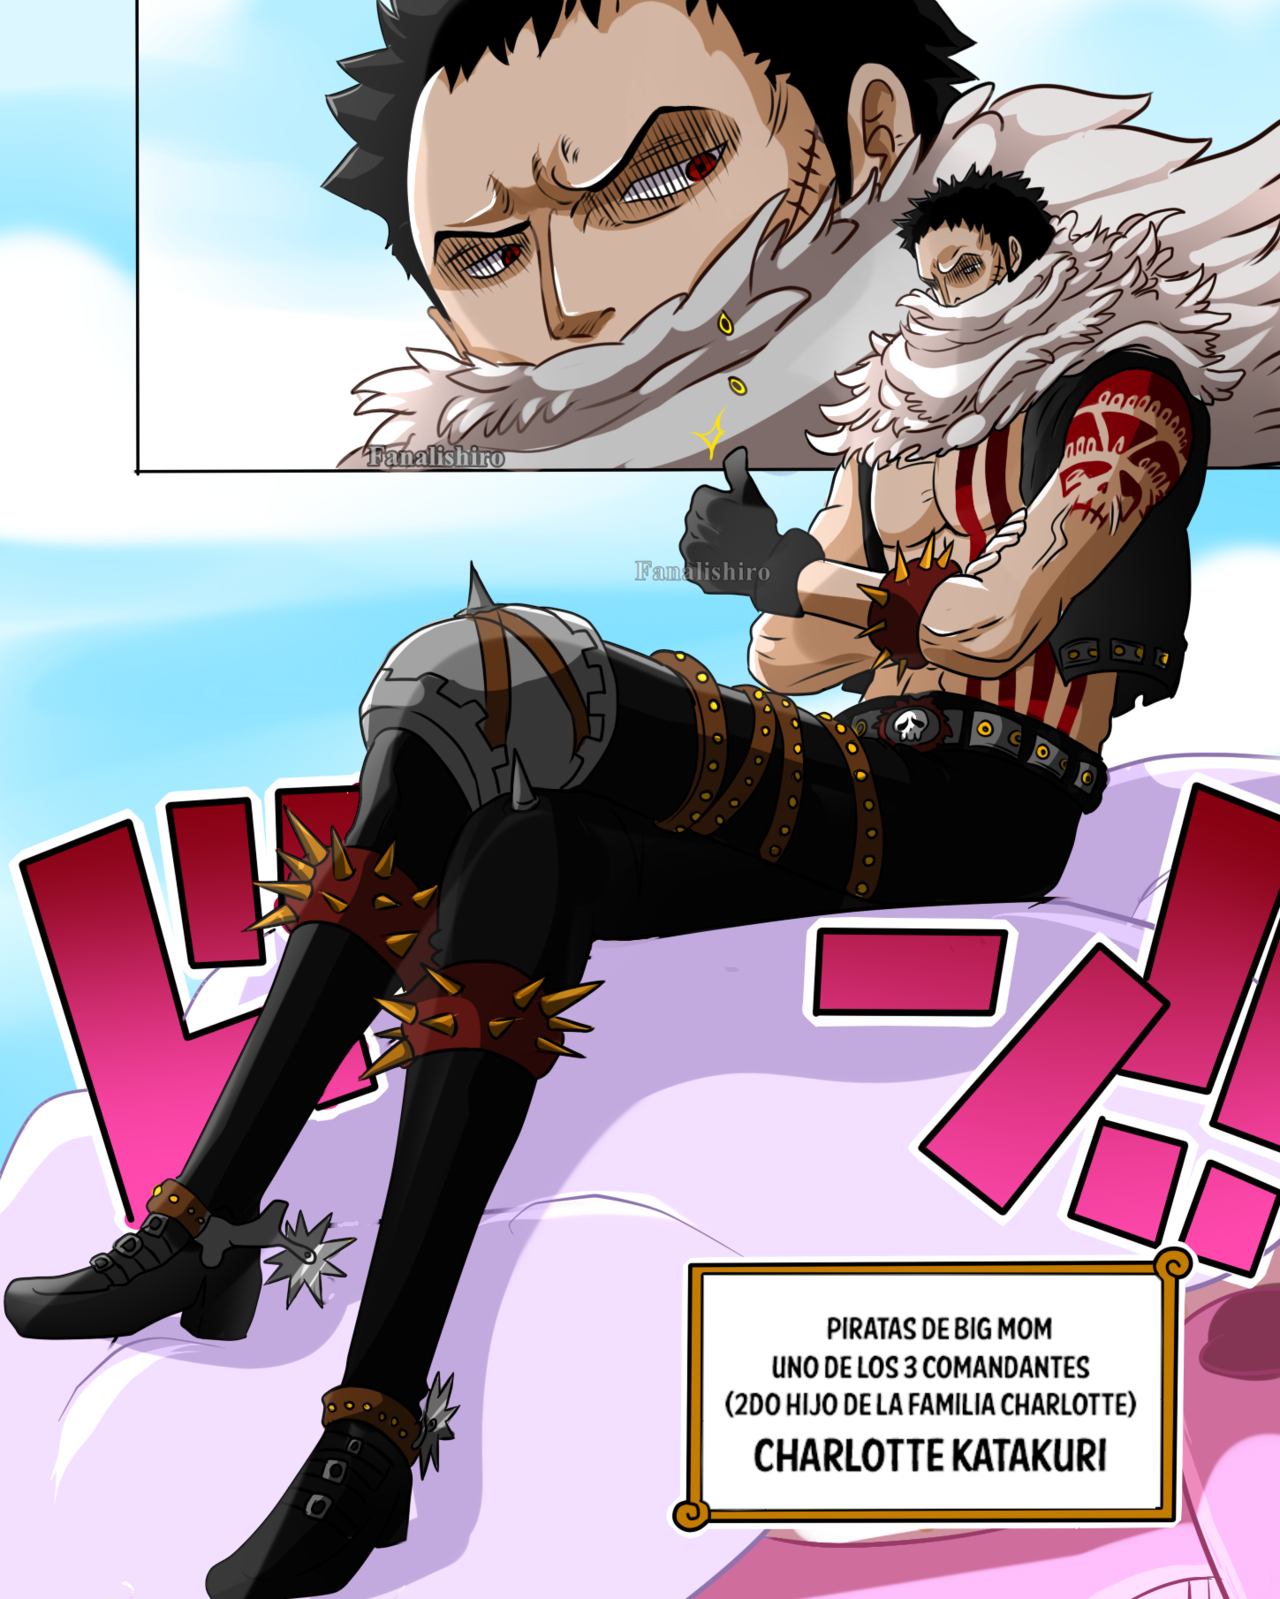 Free Download Charlotte Katakuri One Piece Ch 860 By Fanalishiro On 1280x1599 For Your Desktop Mobile Tablet Explore 95 Charlotte Katakuri Wallpapers Charlotte Katakuri Wallpapers Charlotte Background Unc Charlotte Wallpaper - katakuri roblox